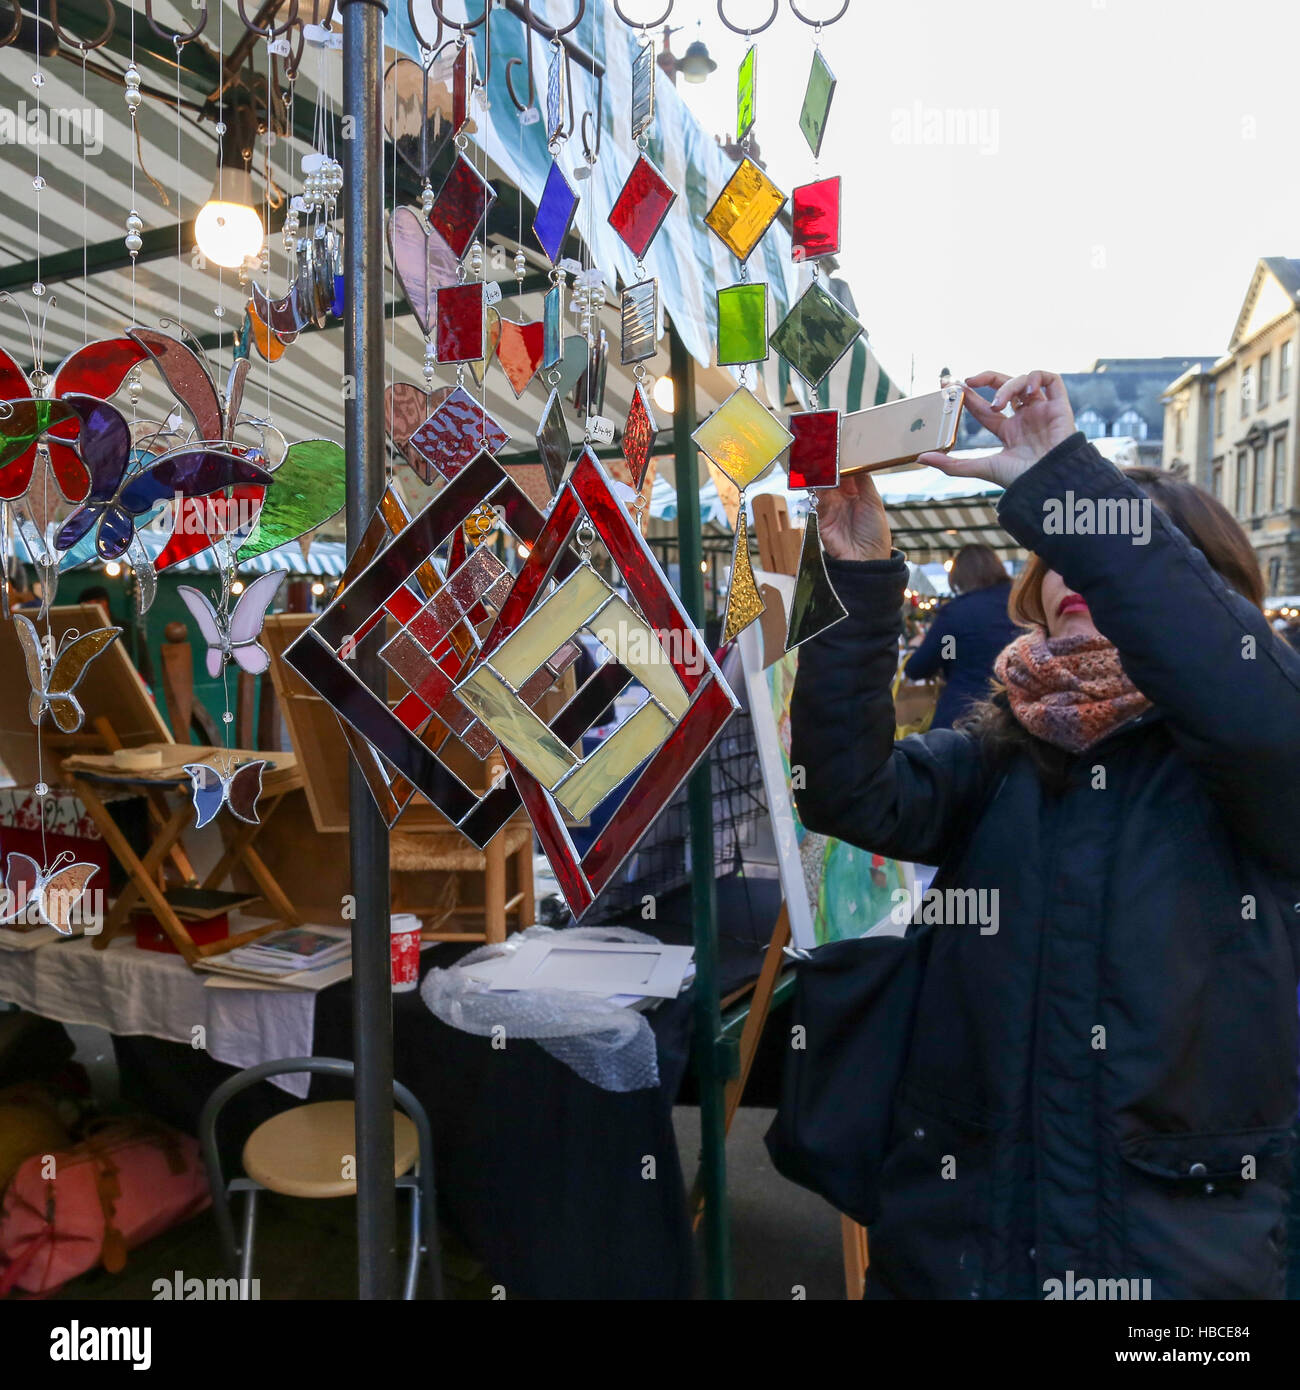 Broad Street, Oxford, United Kingdom, December 04, 2016: Arts and Crafts Market with open stalls on Broad Street stall with stained glass art christmas pendants, Oxford. Stock Photo